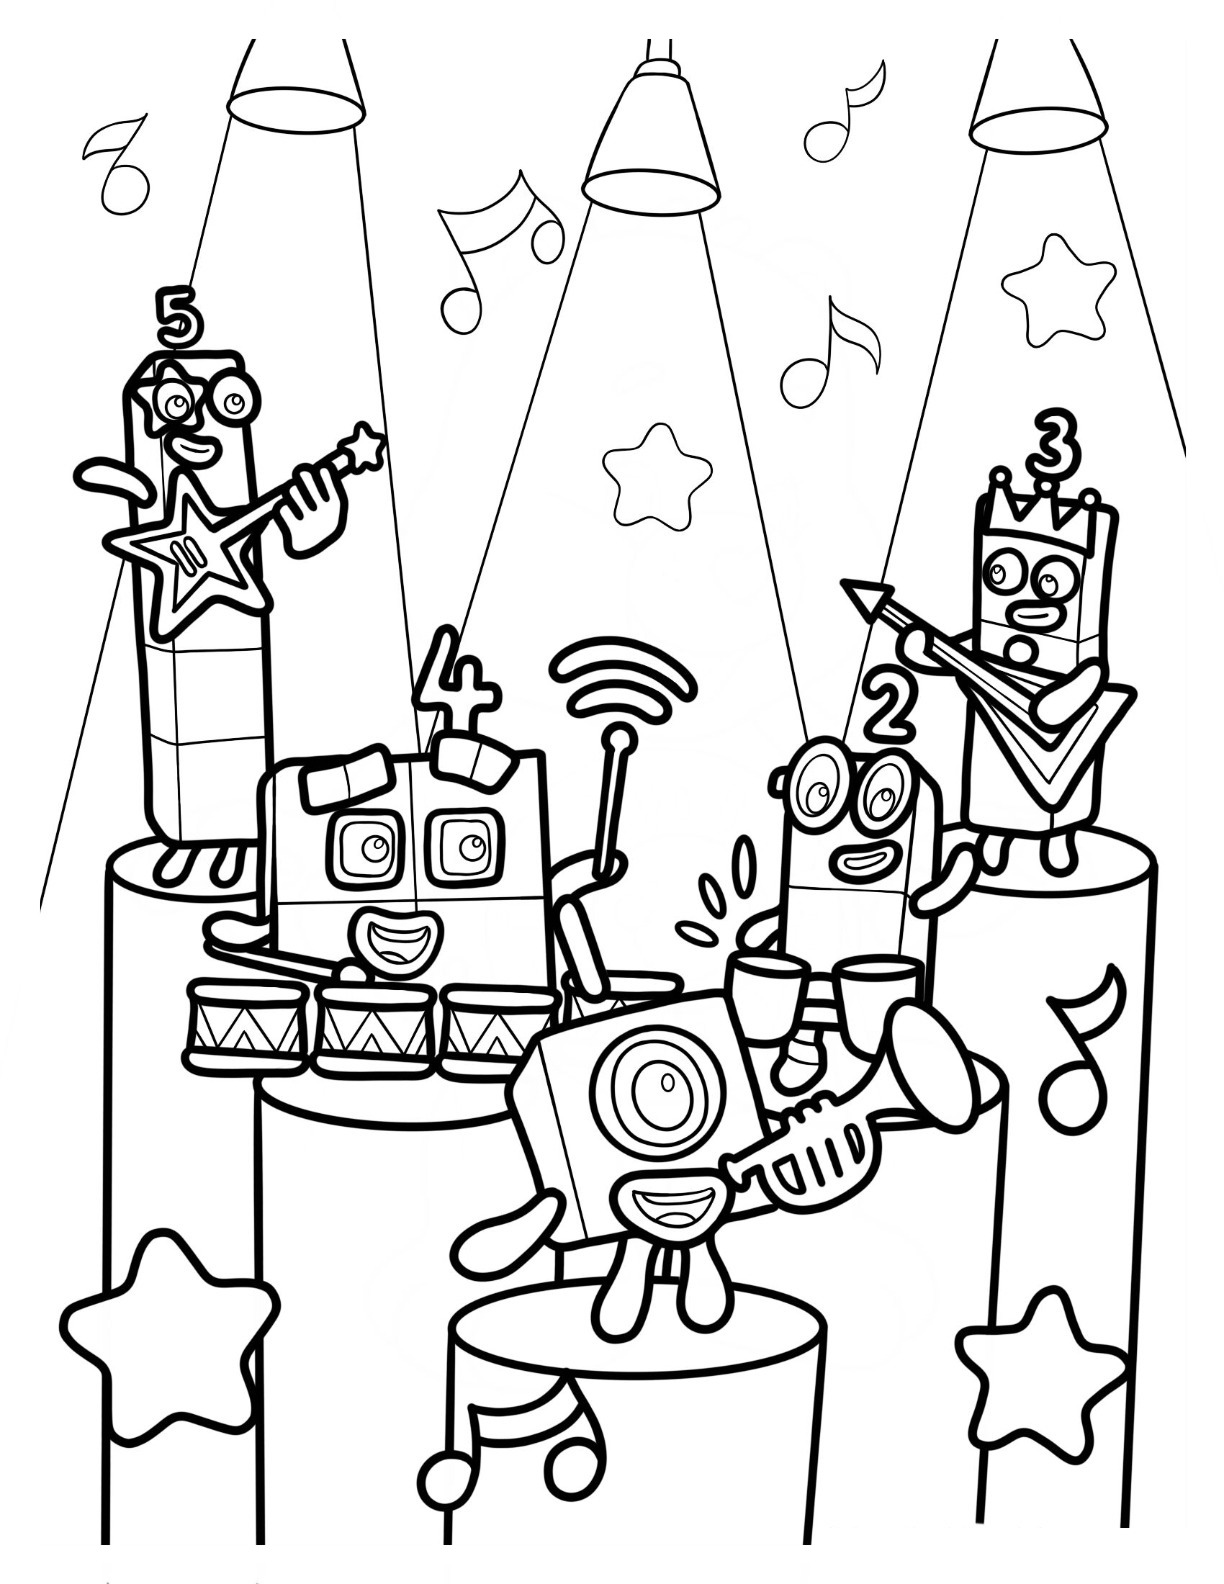 Numberblocks coloring pages by coloringpageswk on